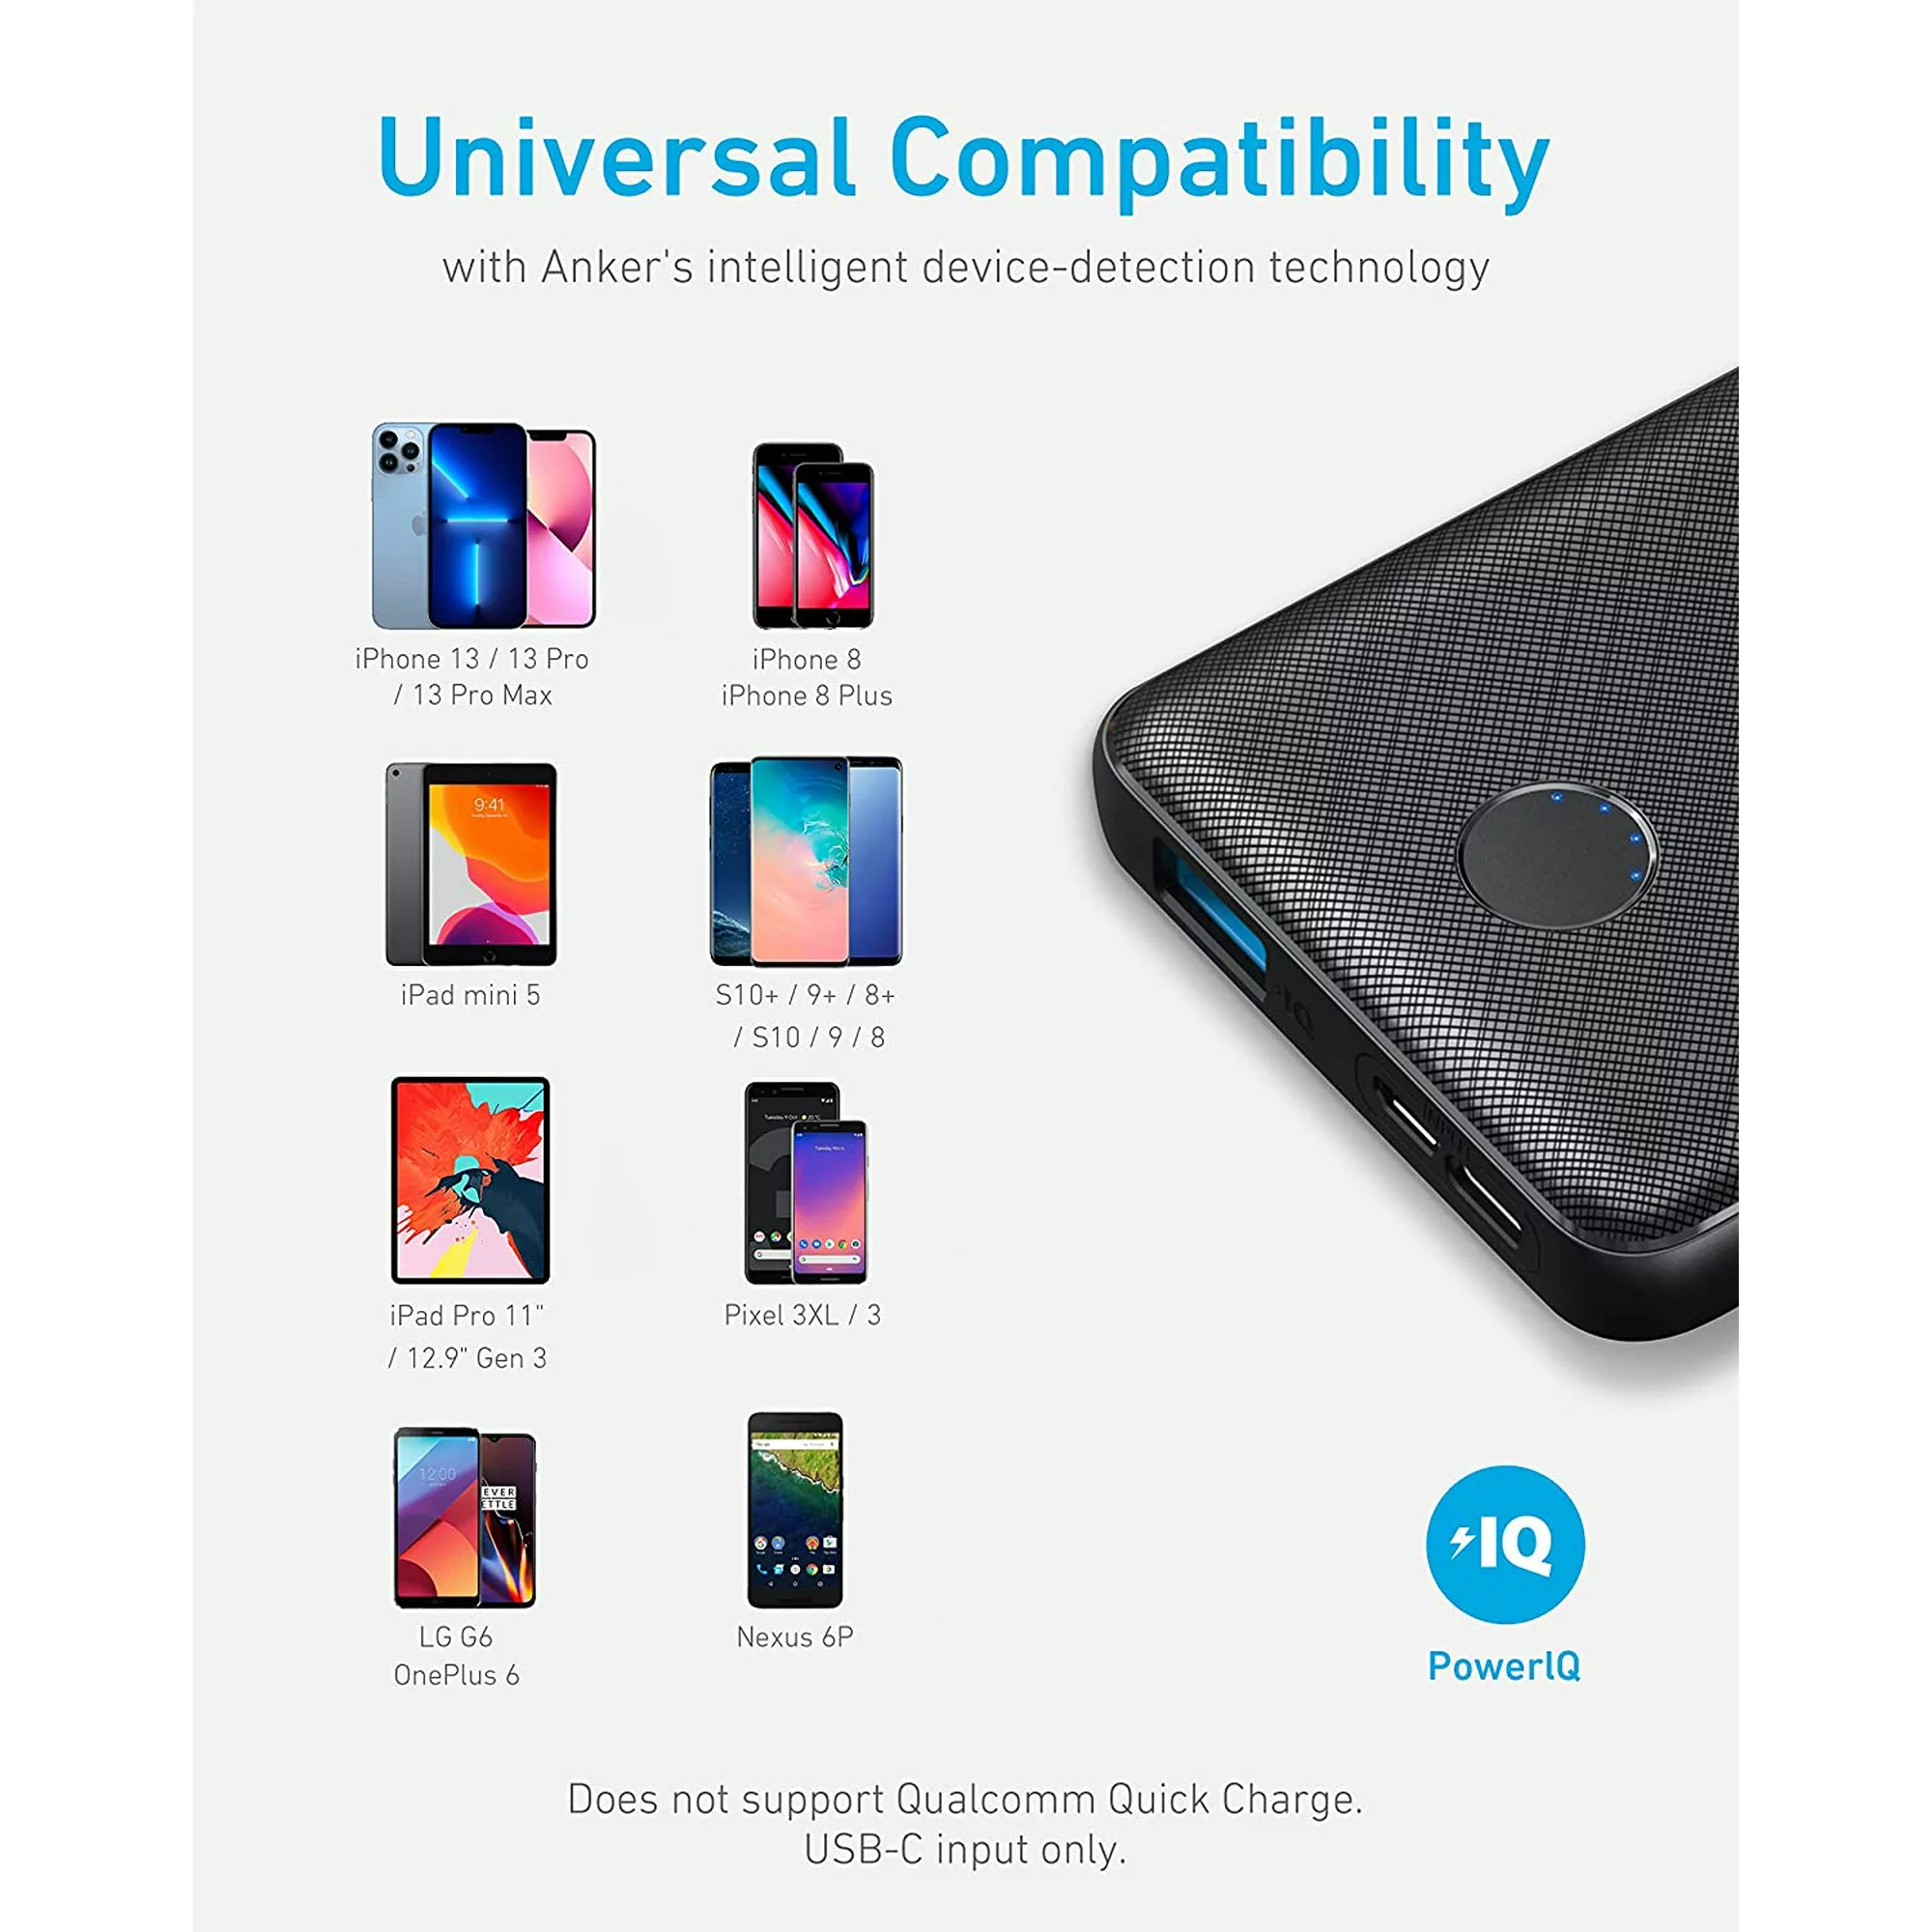 Anker Power Core 10000mAh Portable Charger - Universal Compatibility